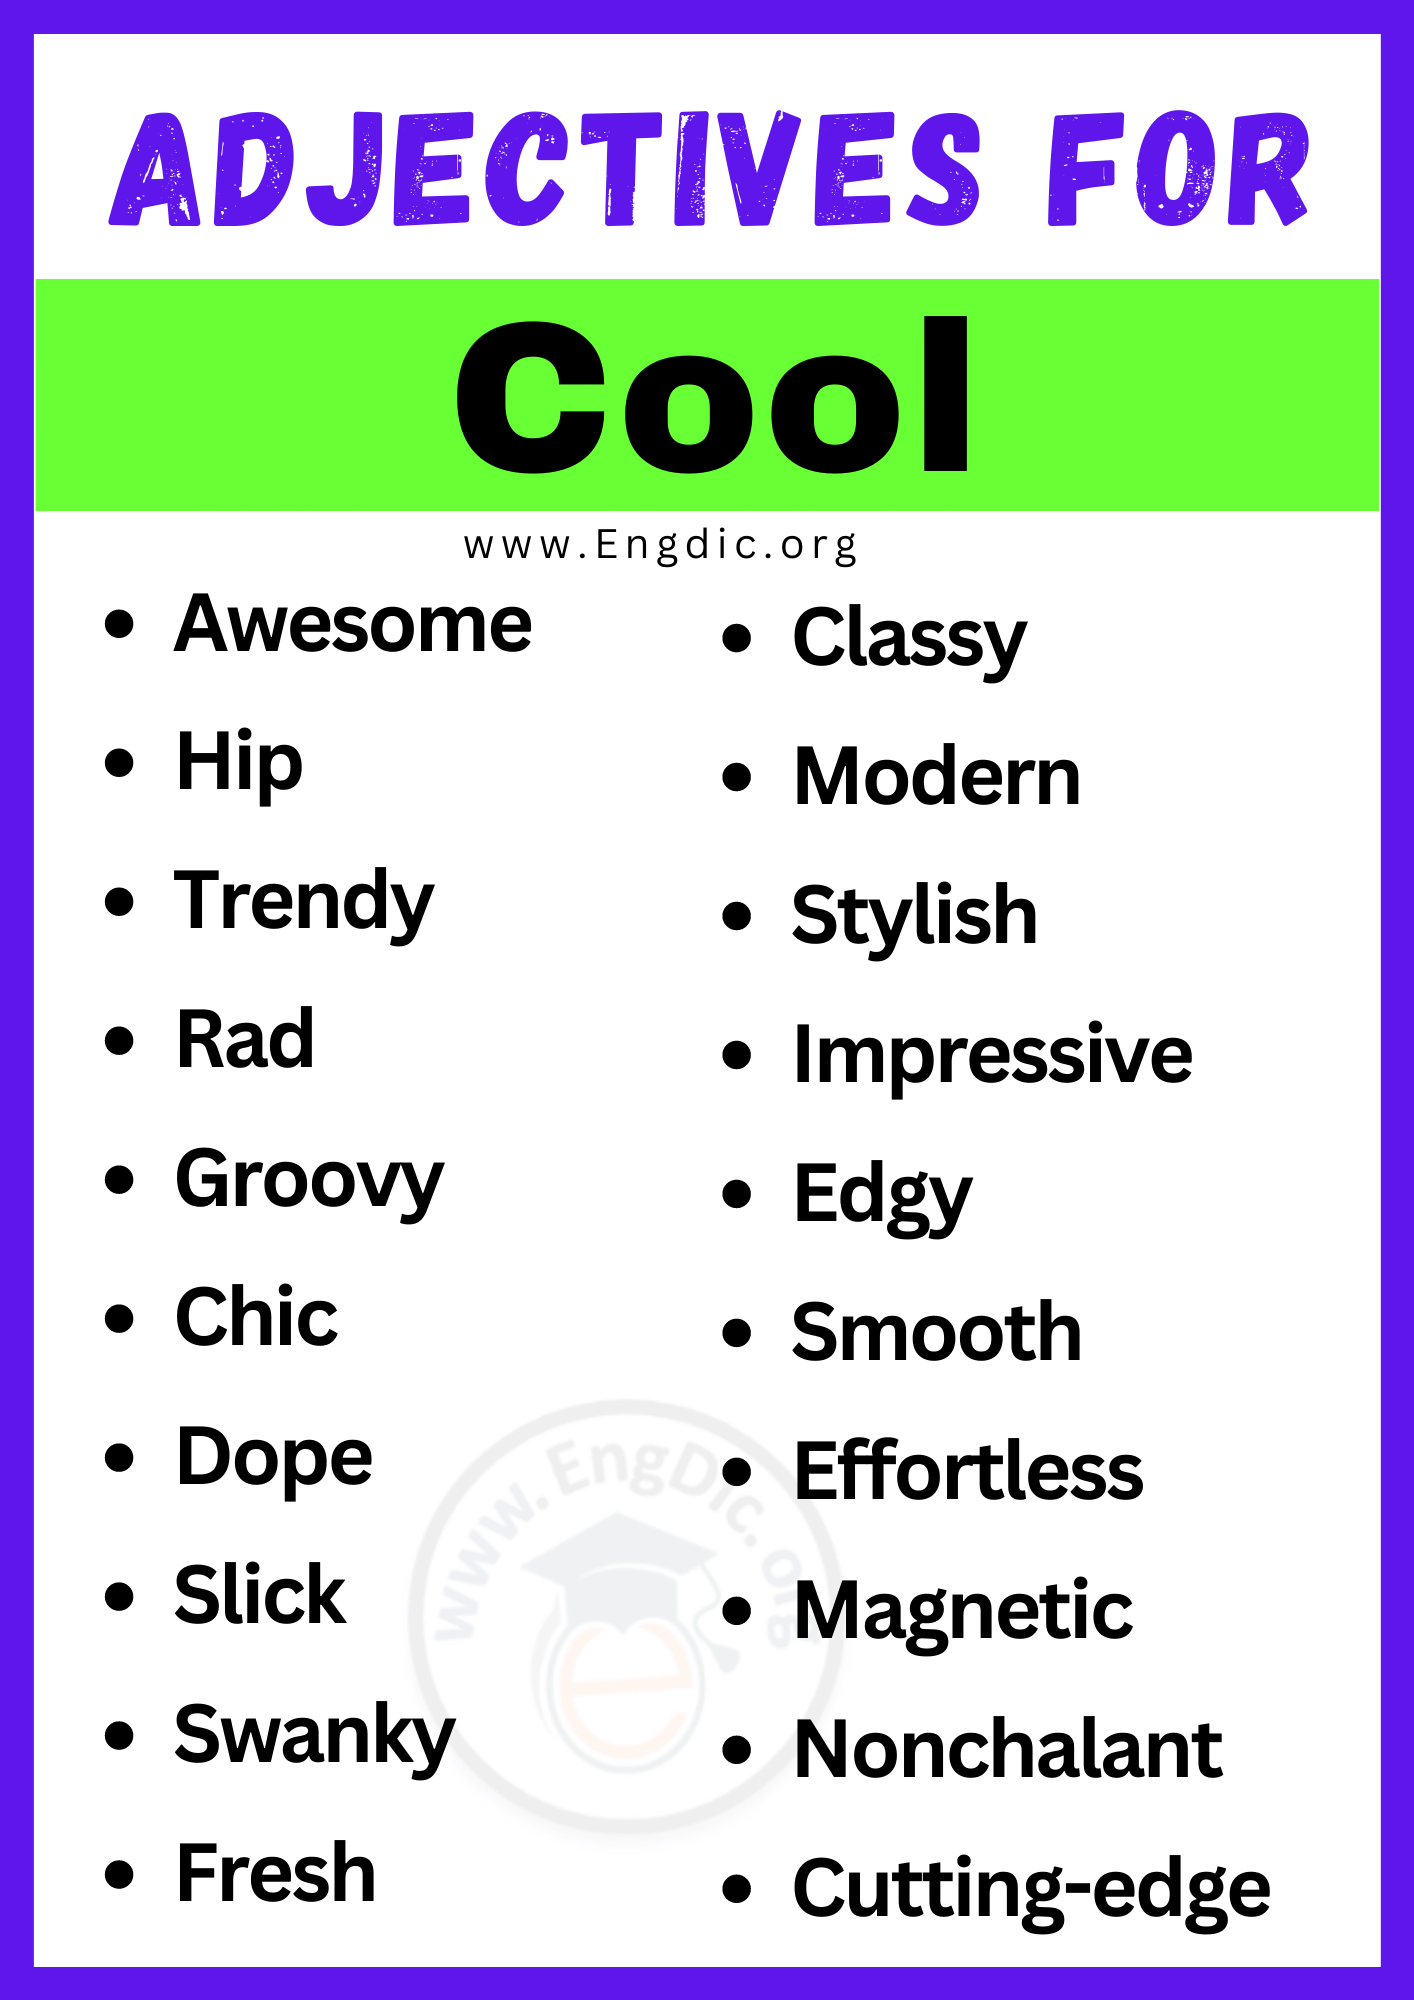 Adjectives for Coolfor Communication